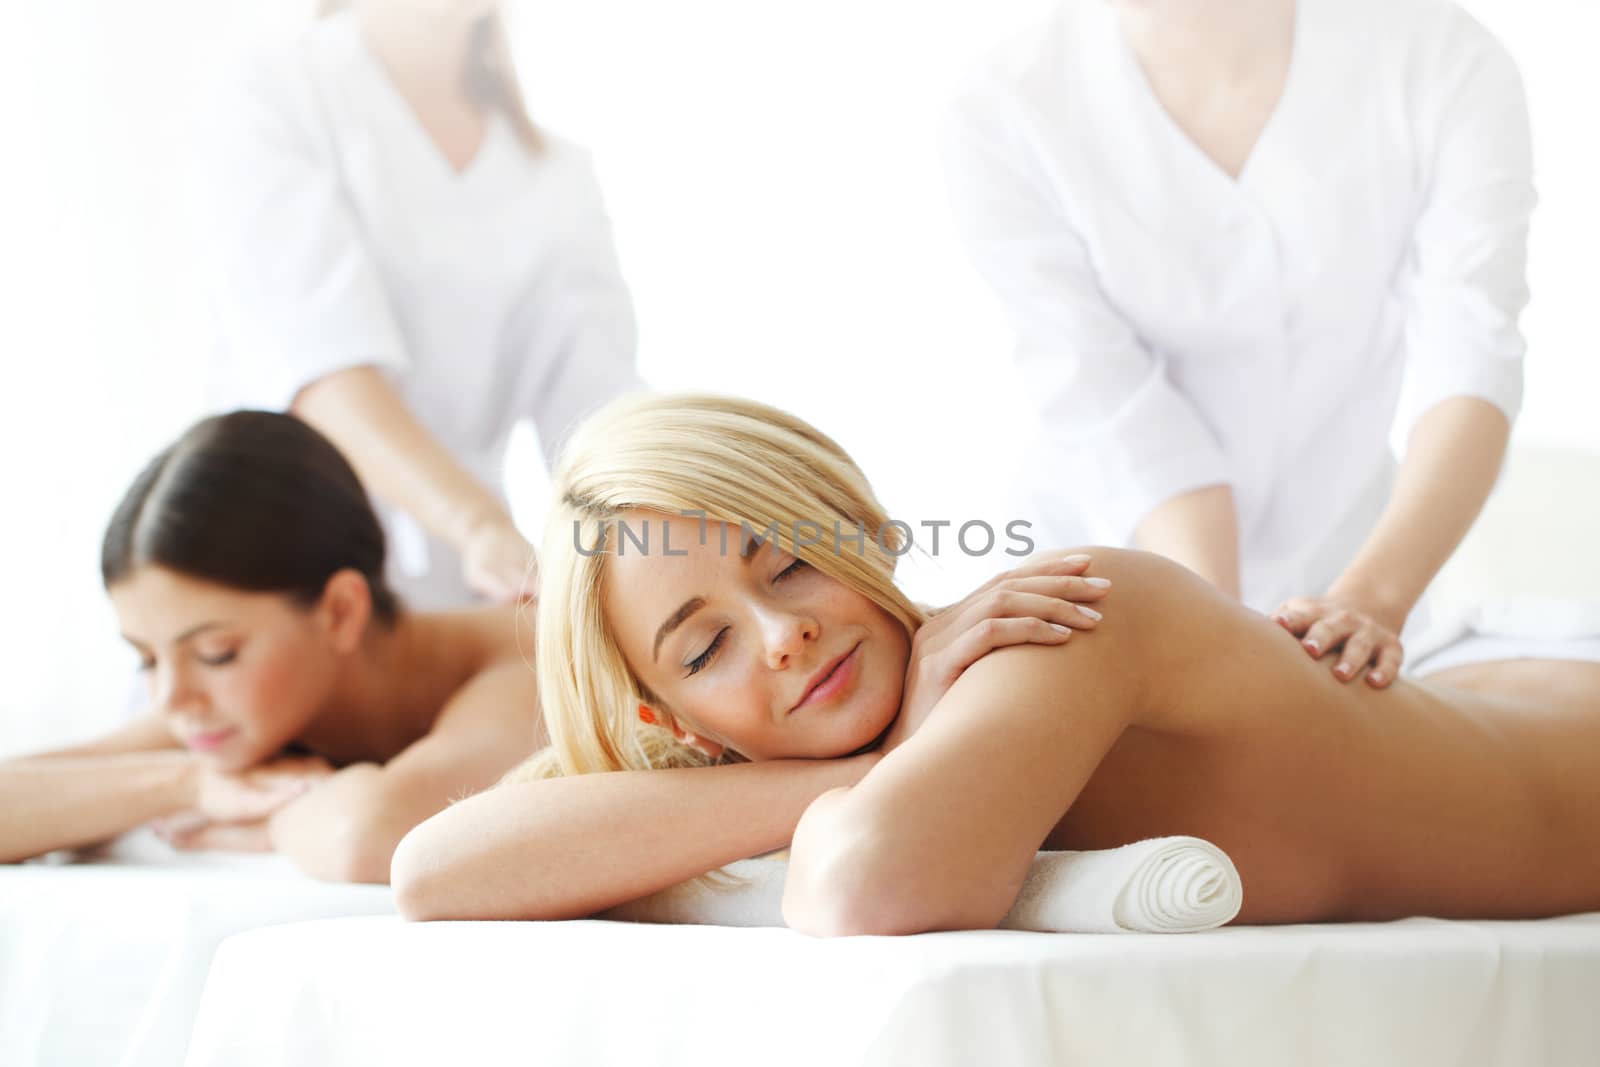 women relaxing at spa session